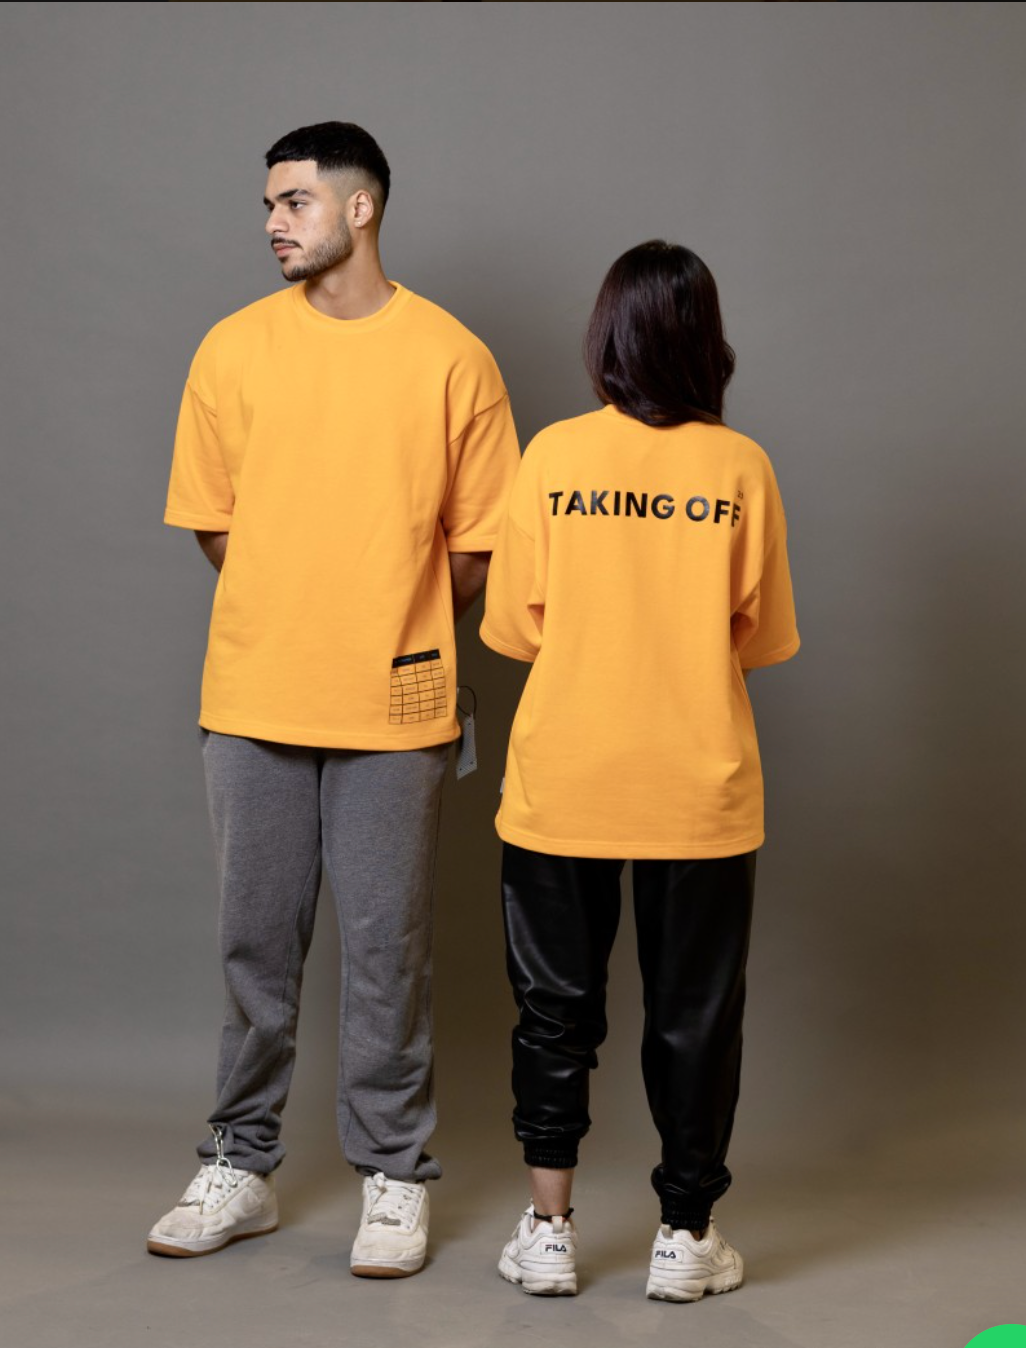 The Taking Off T-shirt